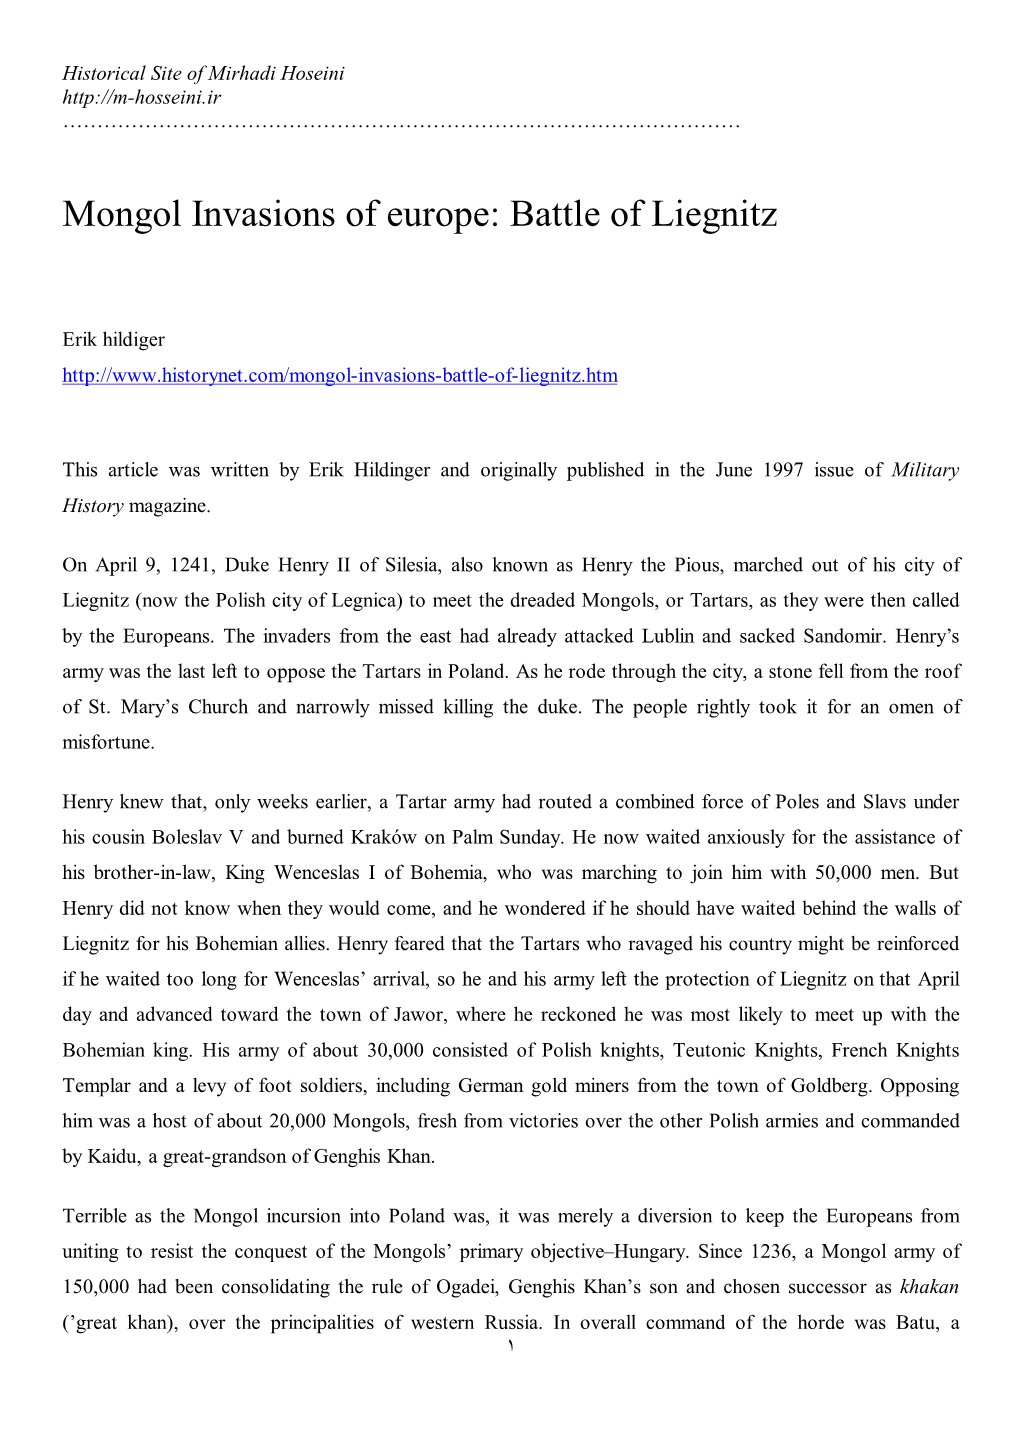 Mongol Invasions of Europe: Battle of Liegnitz